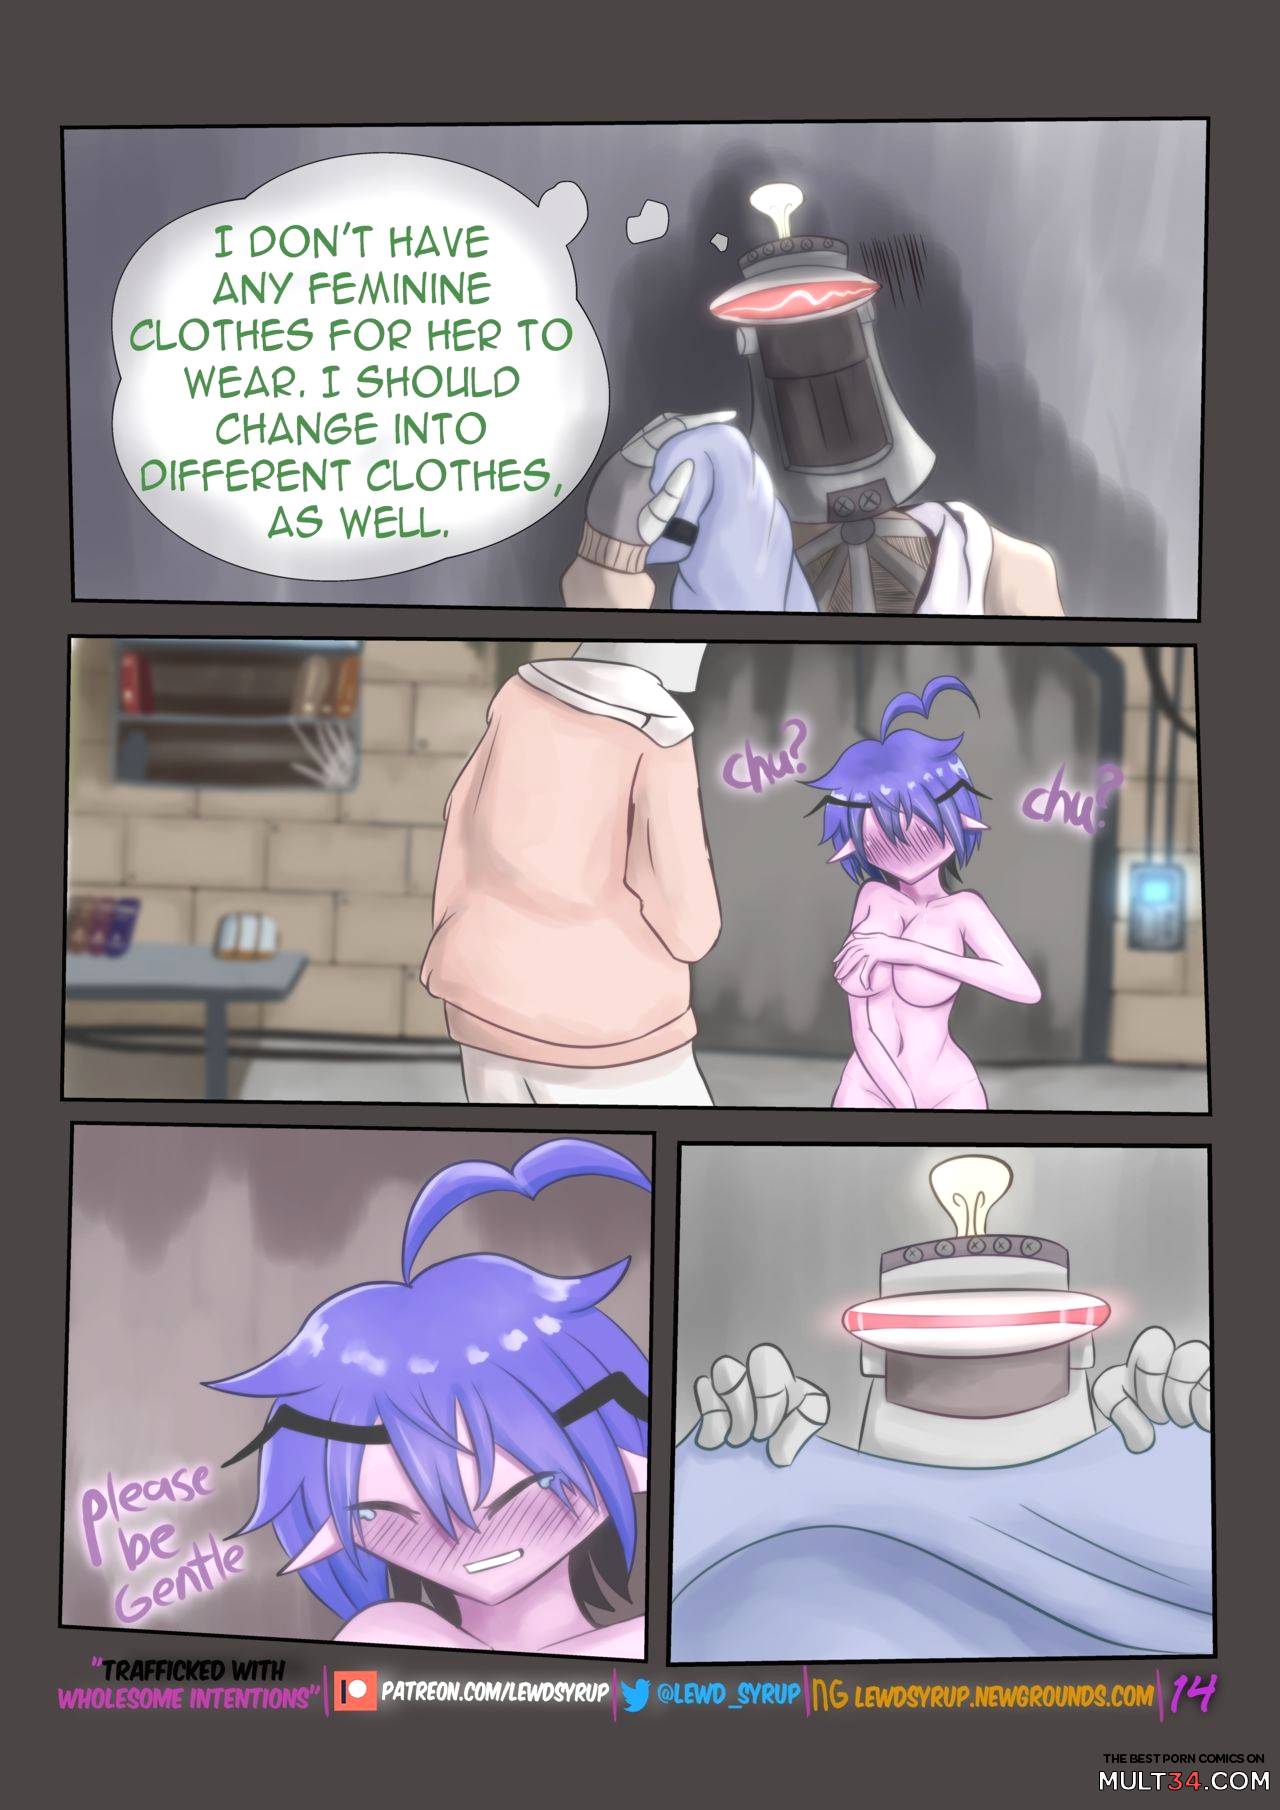 Trafficked with Wholesome Intentions page 16